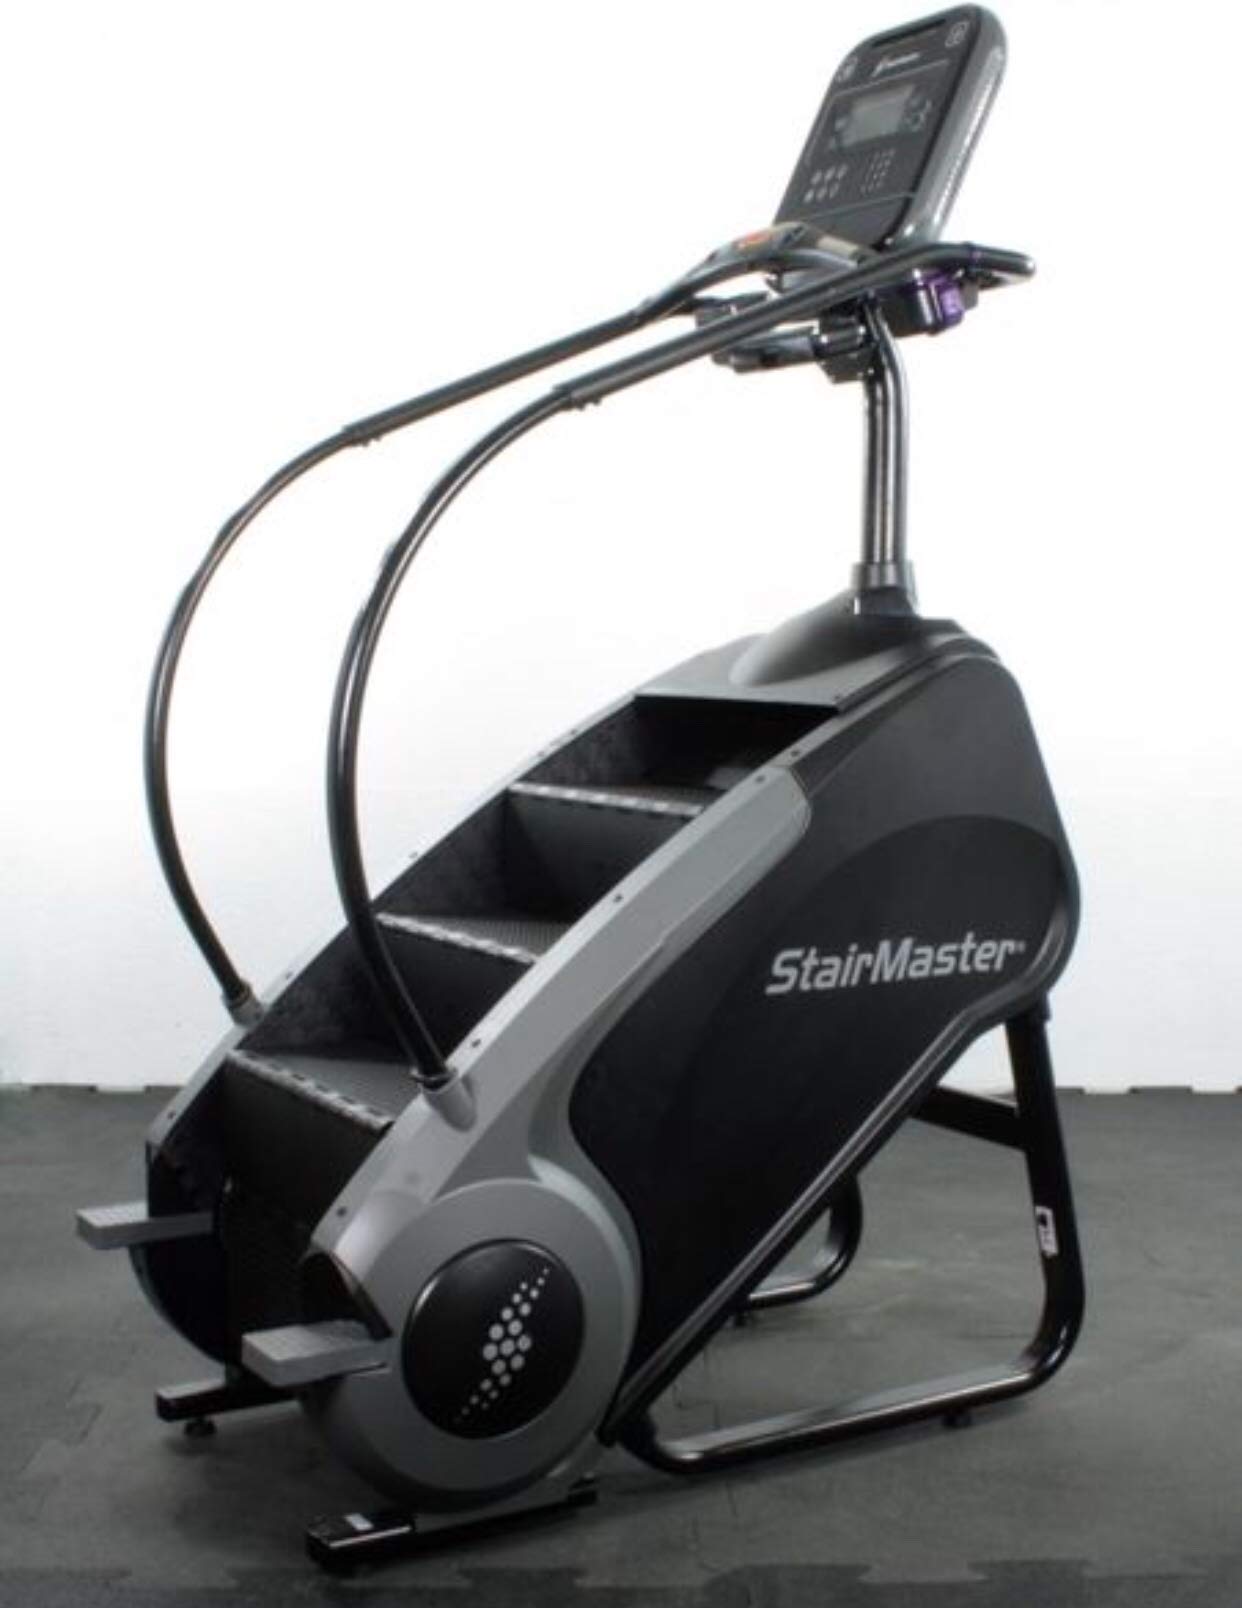 StairMaster 8 Series 8G Gauntlet Stepmill Stepper Exercise Machine with LCD Console